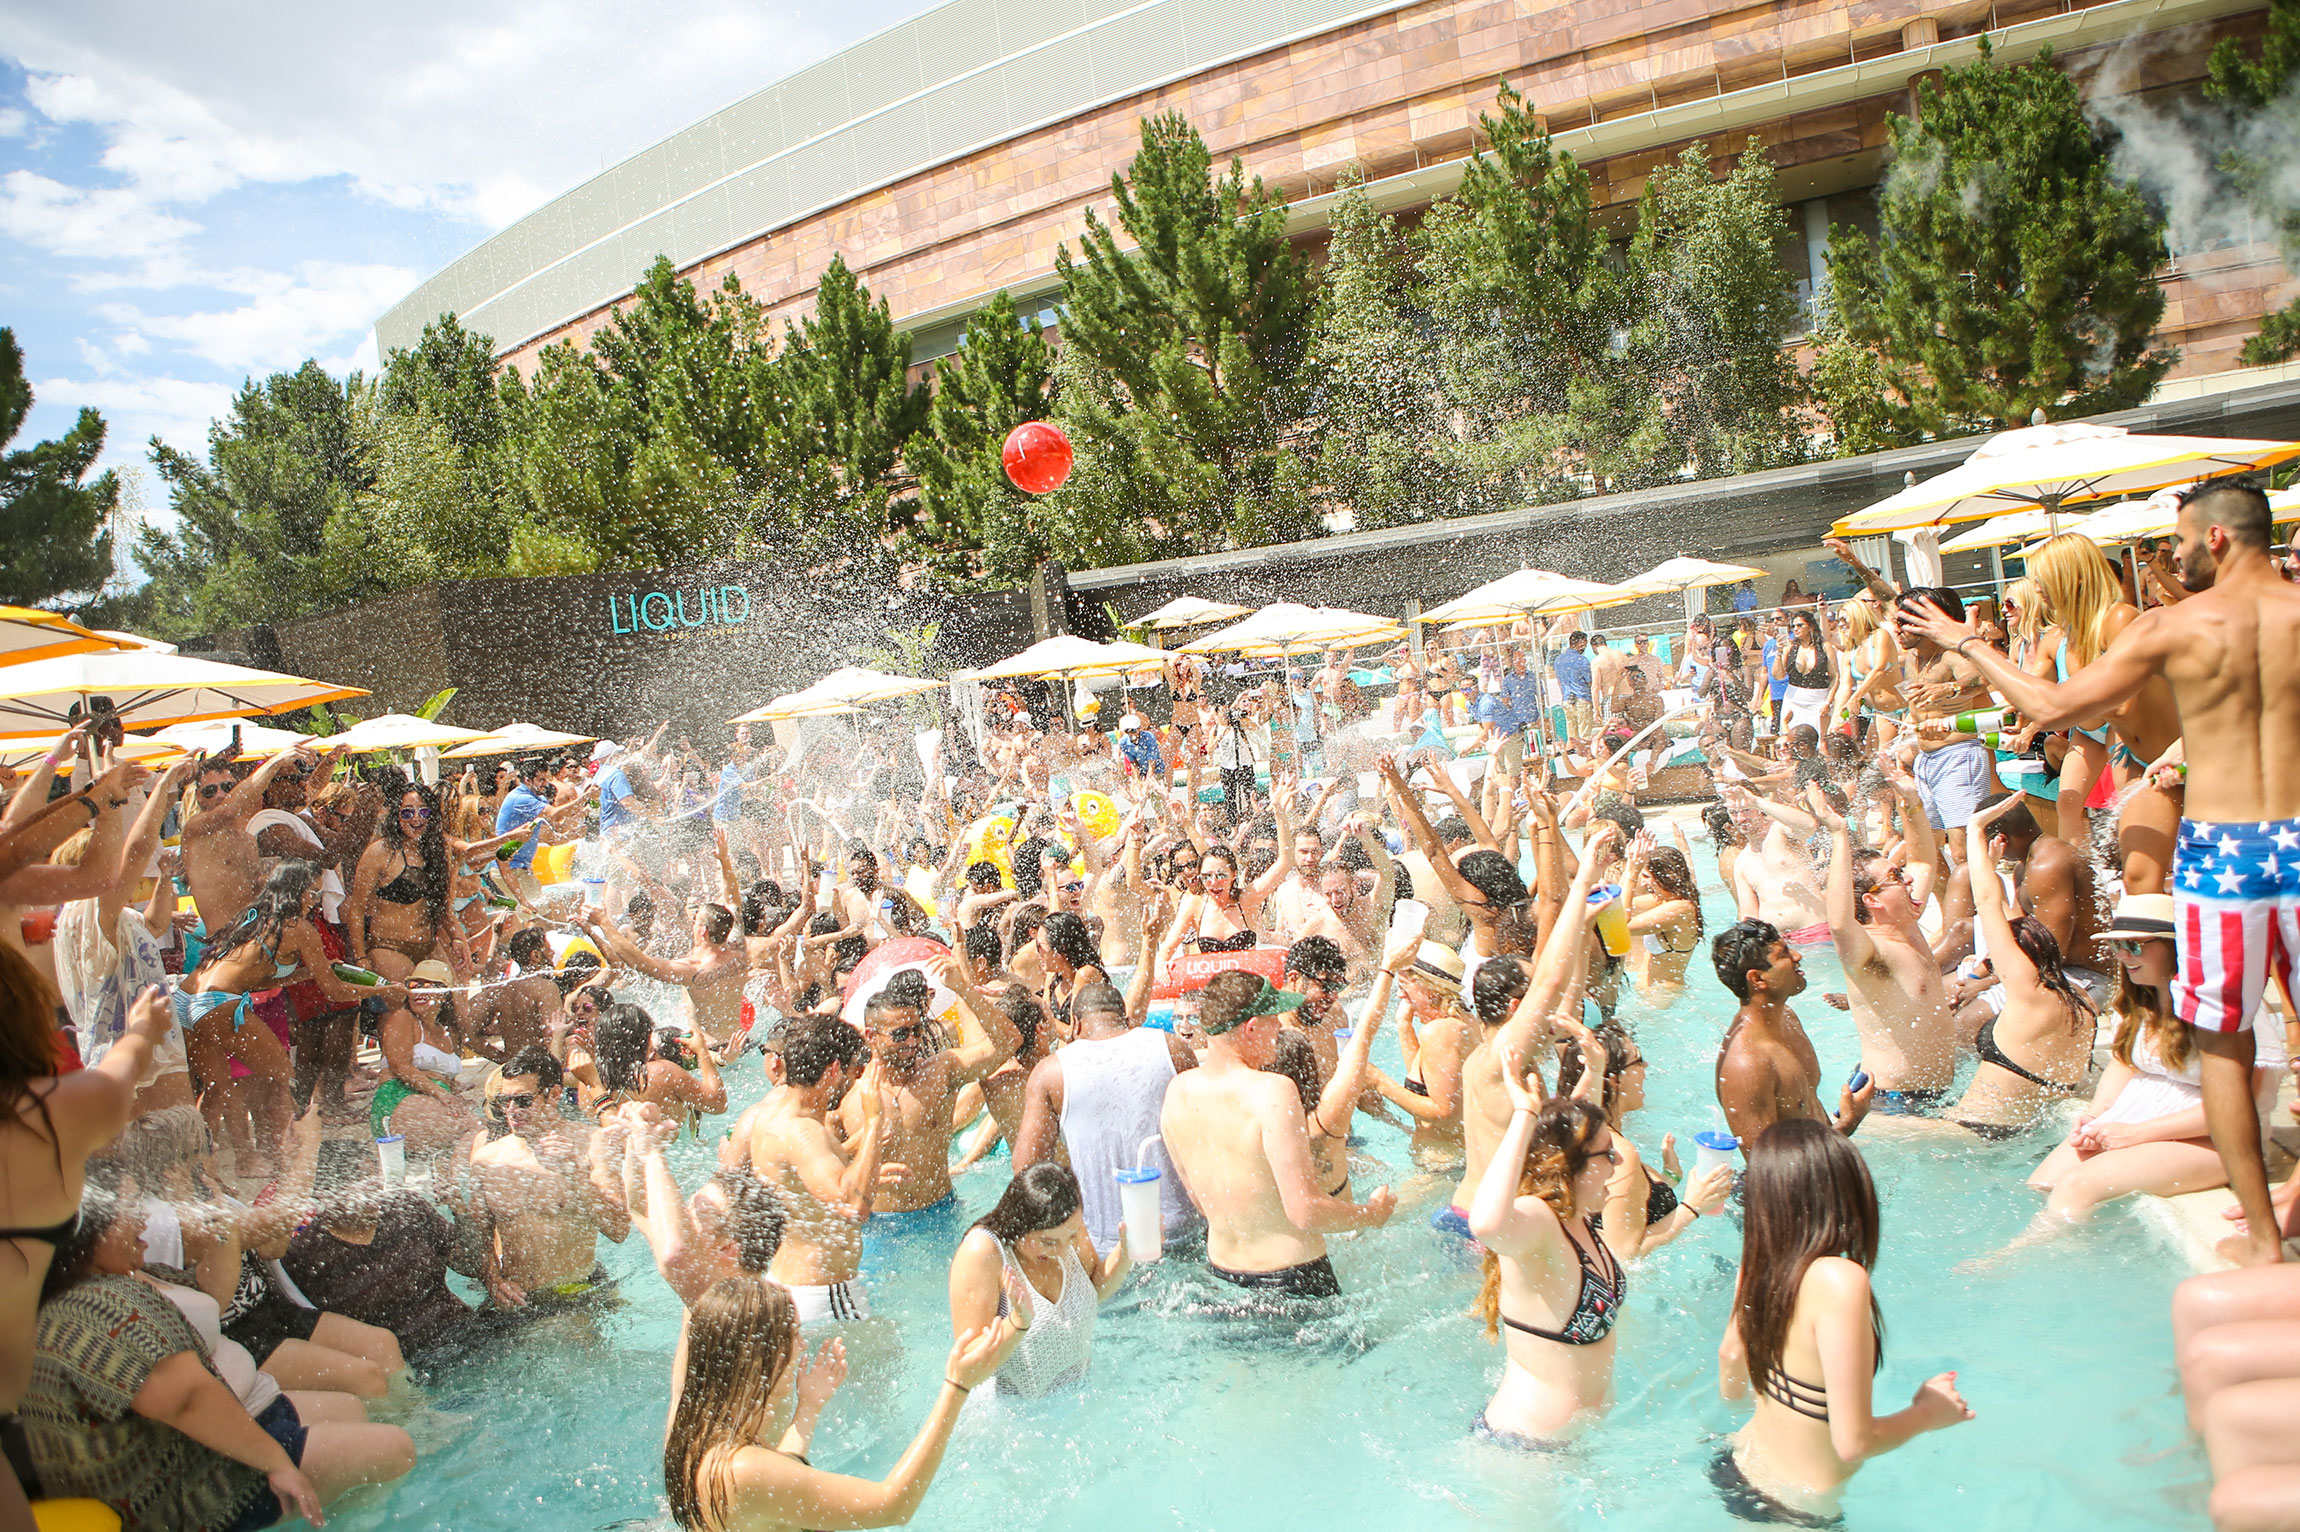 Las Vegas Pool Clubs Set to Reopen in March 2021 With Social Distancing  Measures -  - The Latest Electronic Dance Music News, Reviews &  Artists